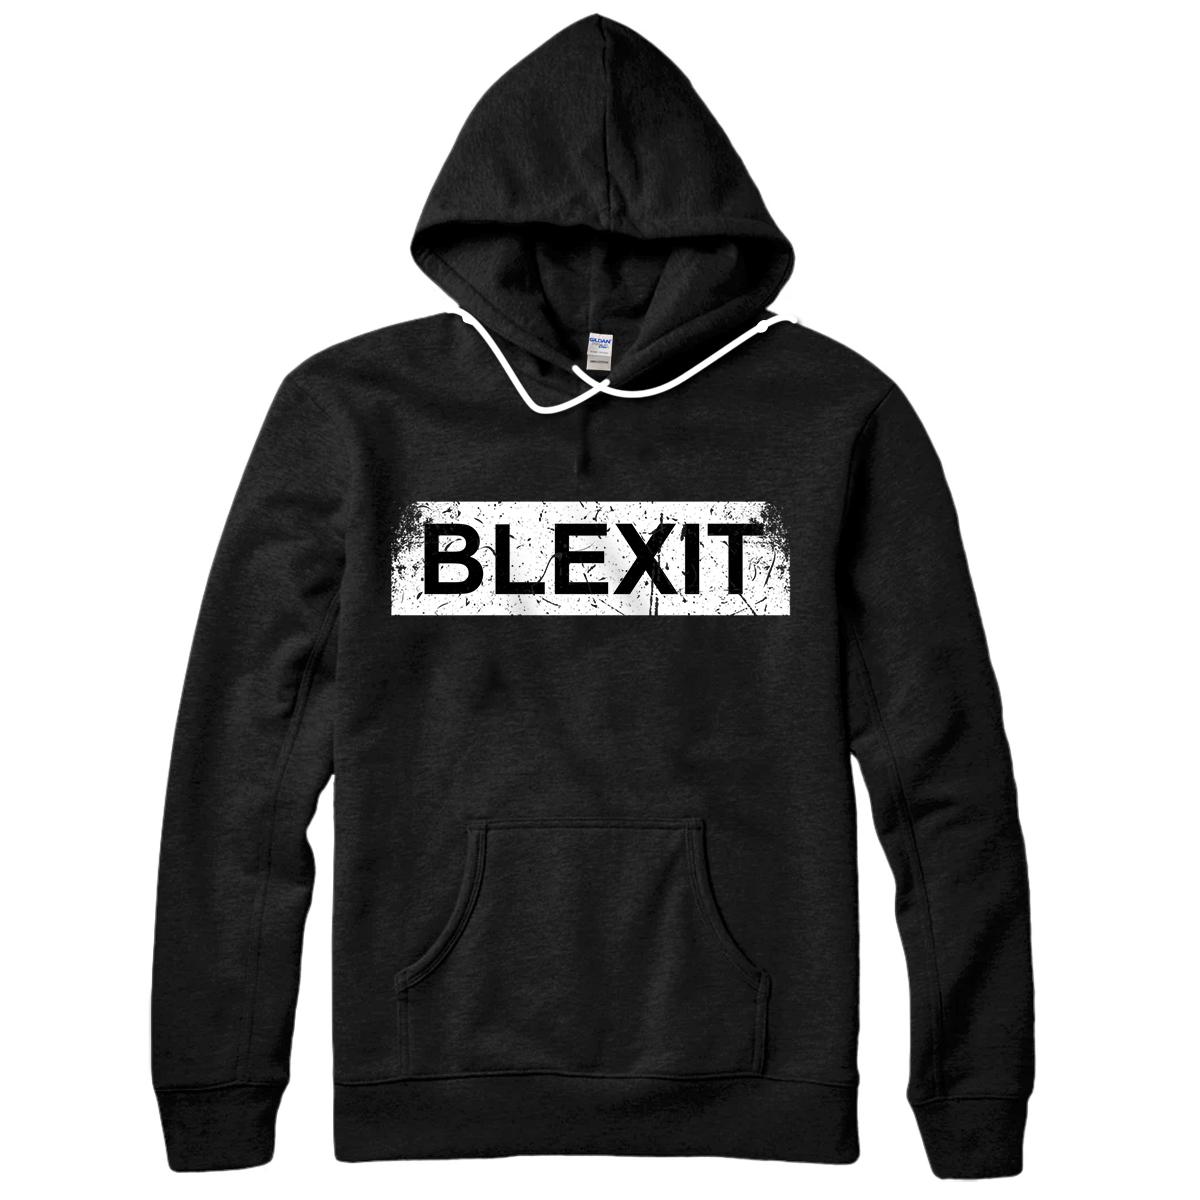 Personalized Blexit Shirt Hoodies,Black Lives Matter 2020 Debate Election Pullover Hoodie